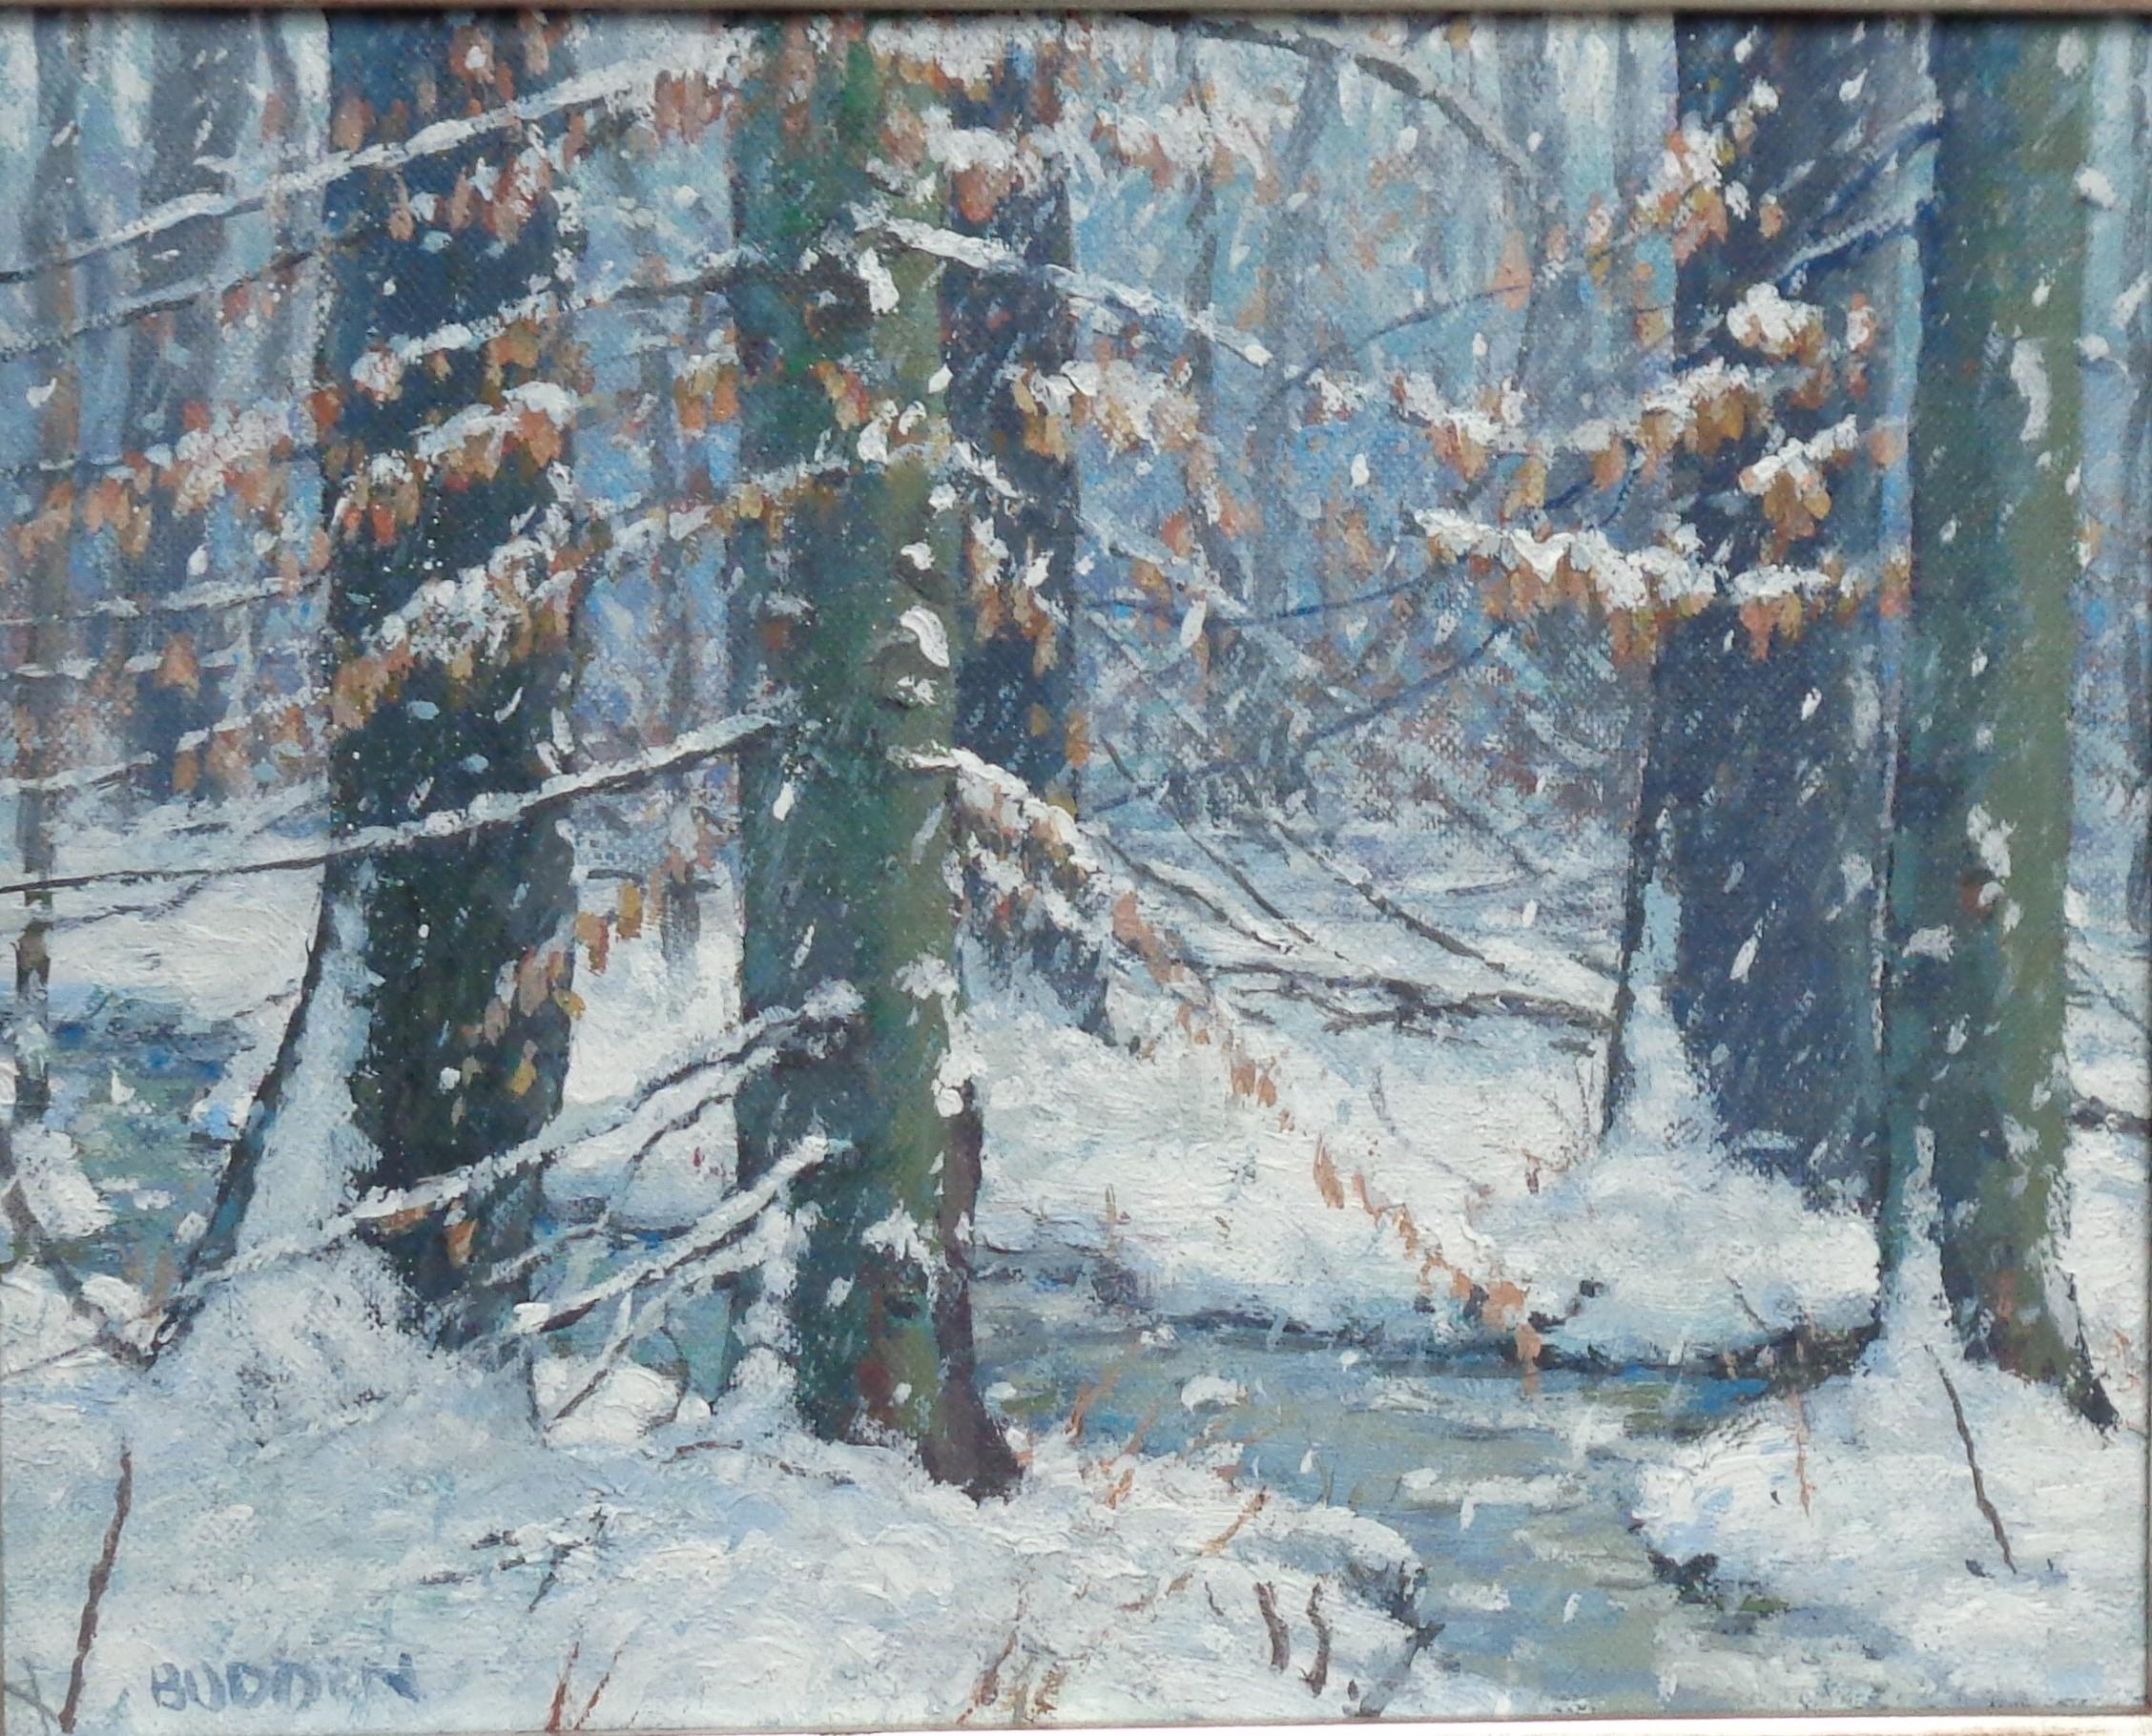  Contemporary Landscape Winter Snow Scene Oil Painting by Michael Budden For Sale 1